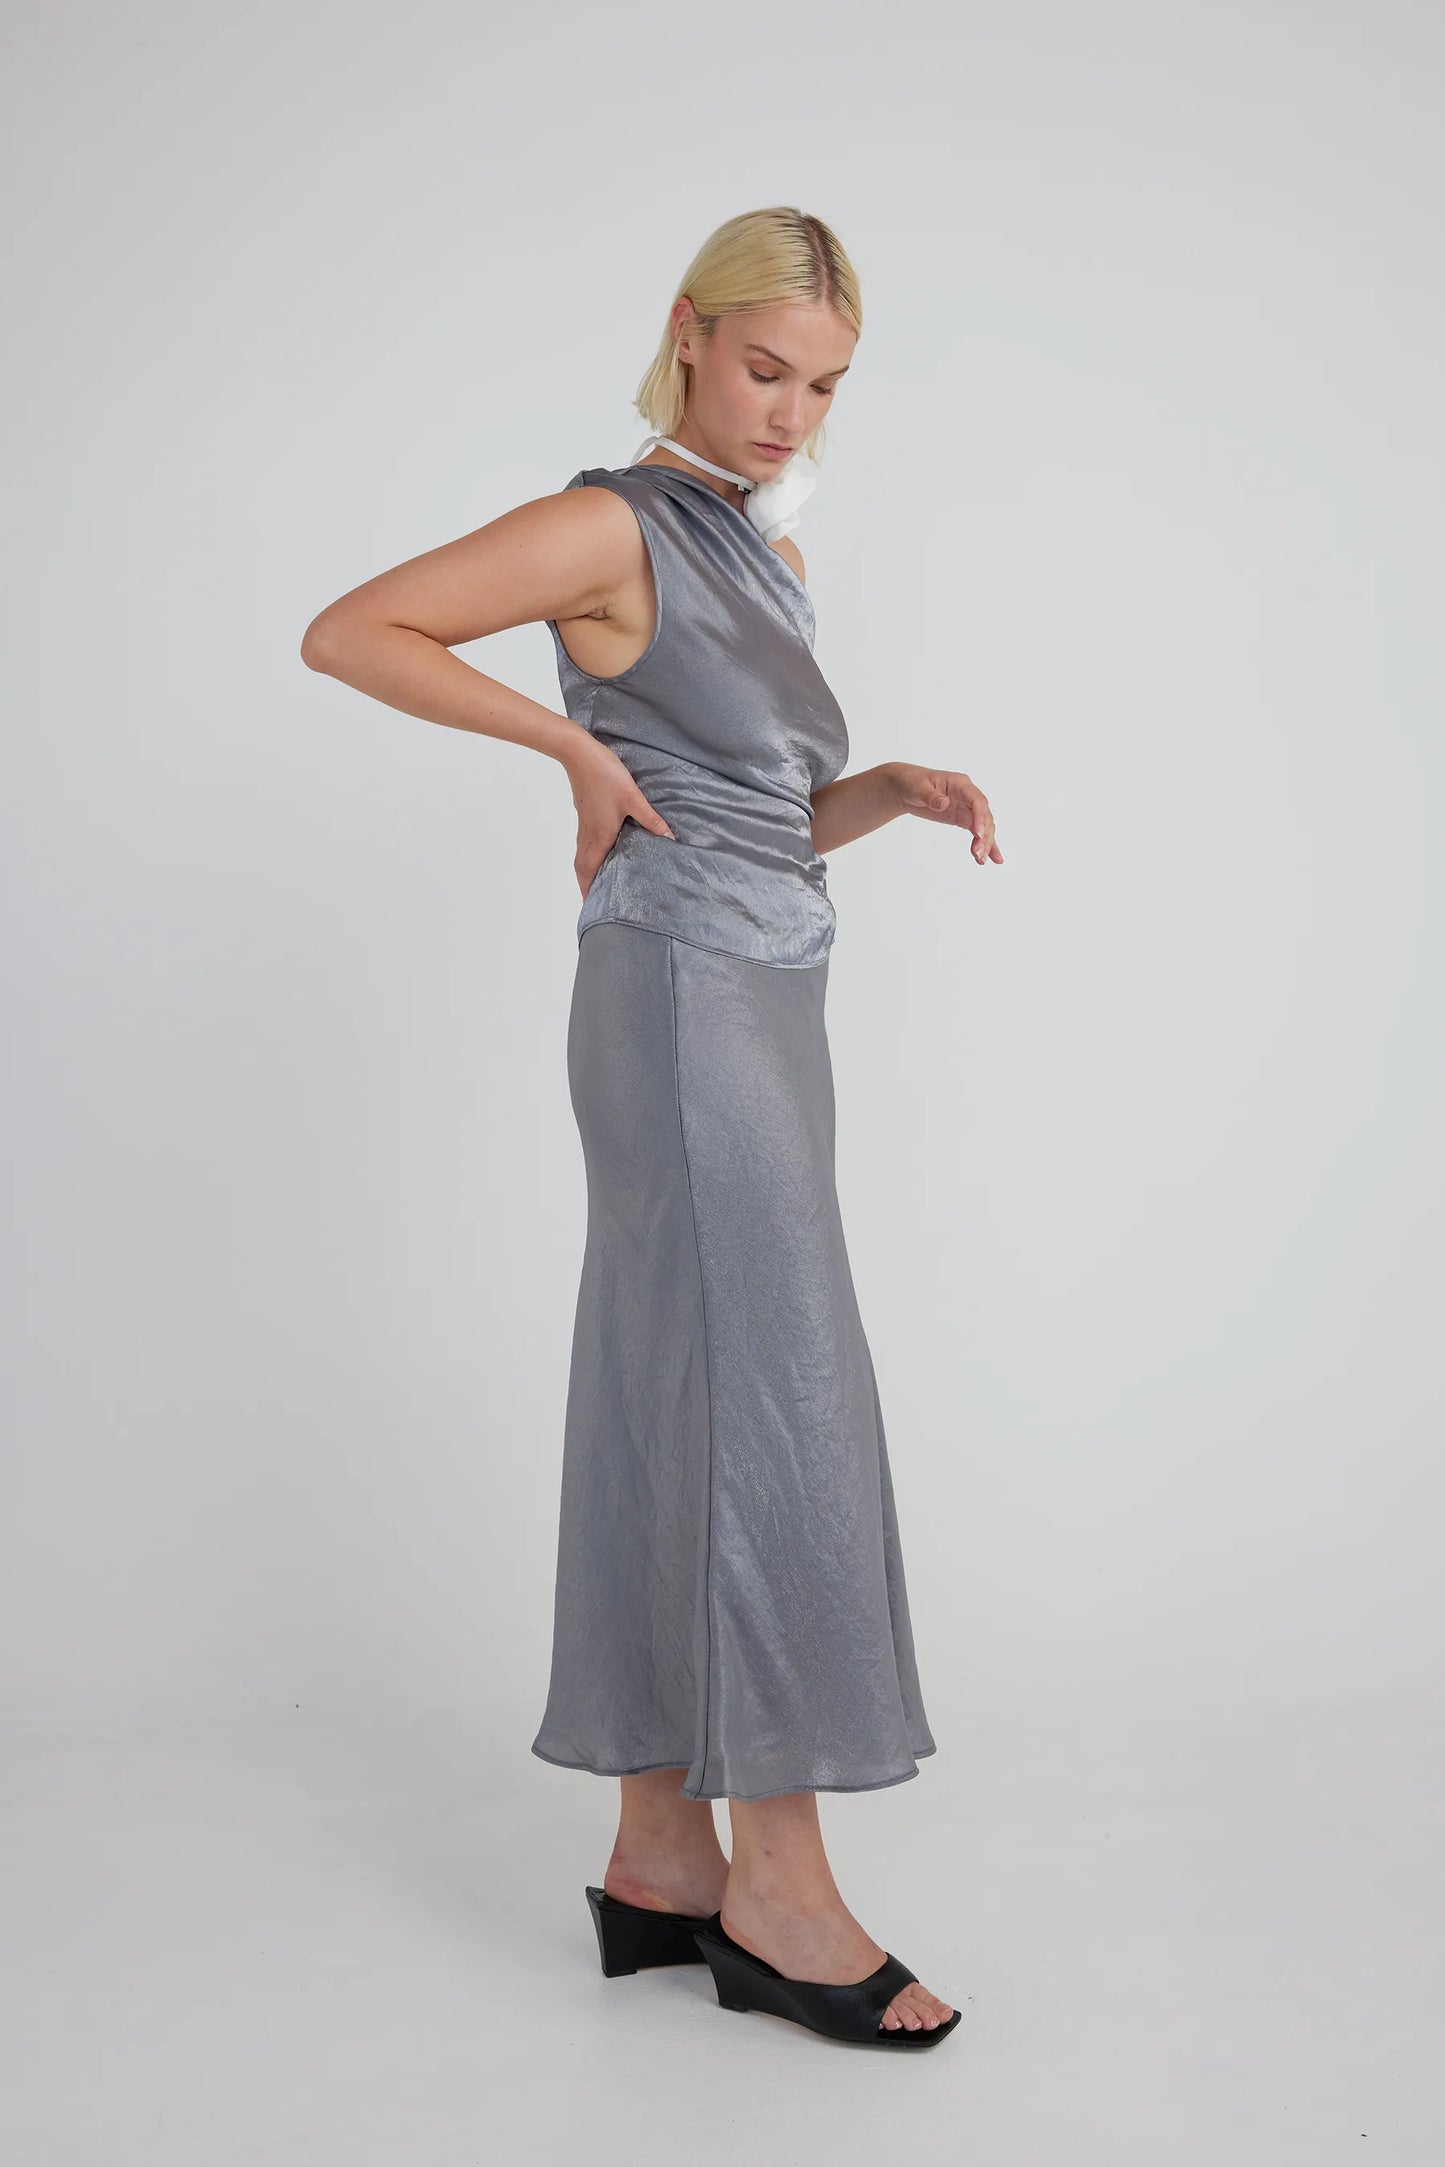 UMA Store Muse the label Ora Top  Silver grey metallic satin one shoulder top blouse 